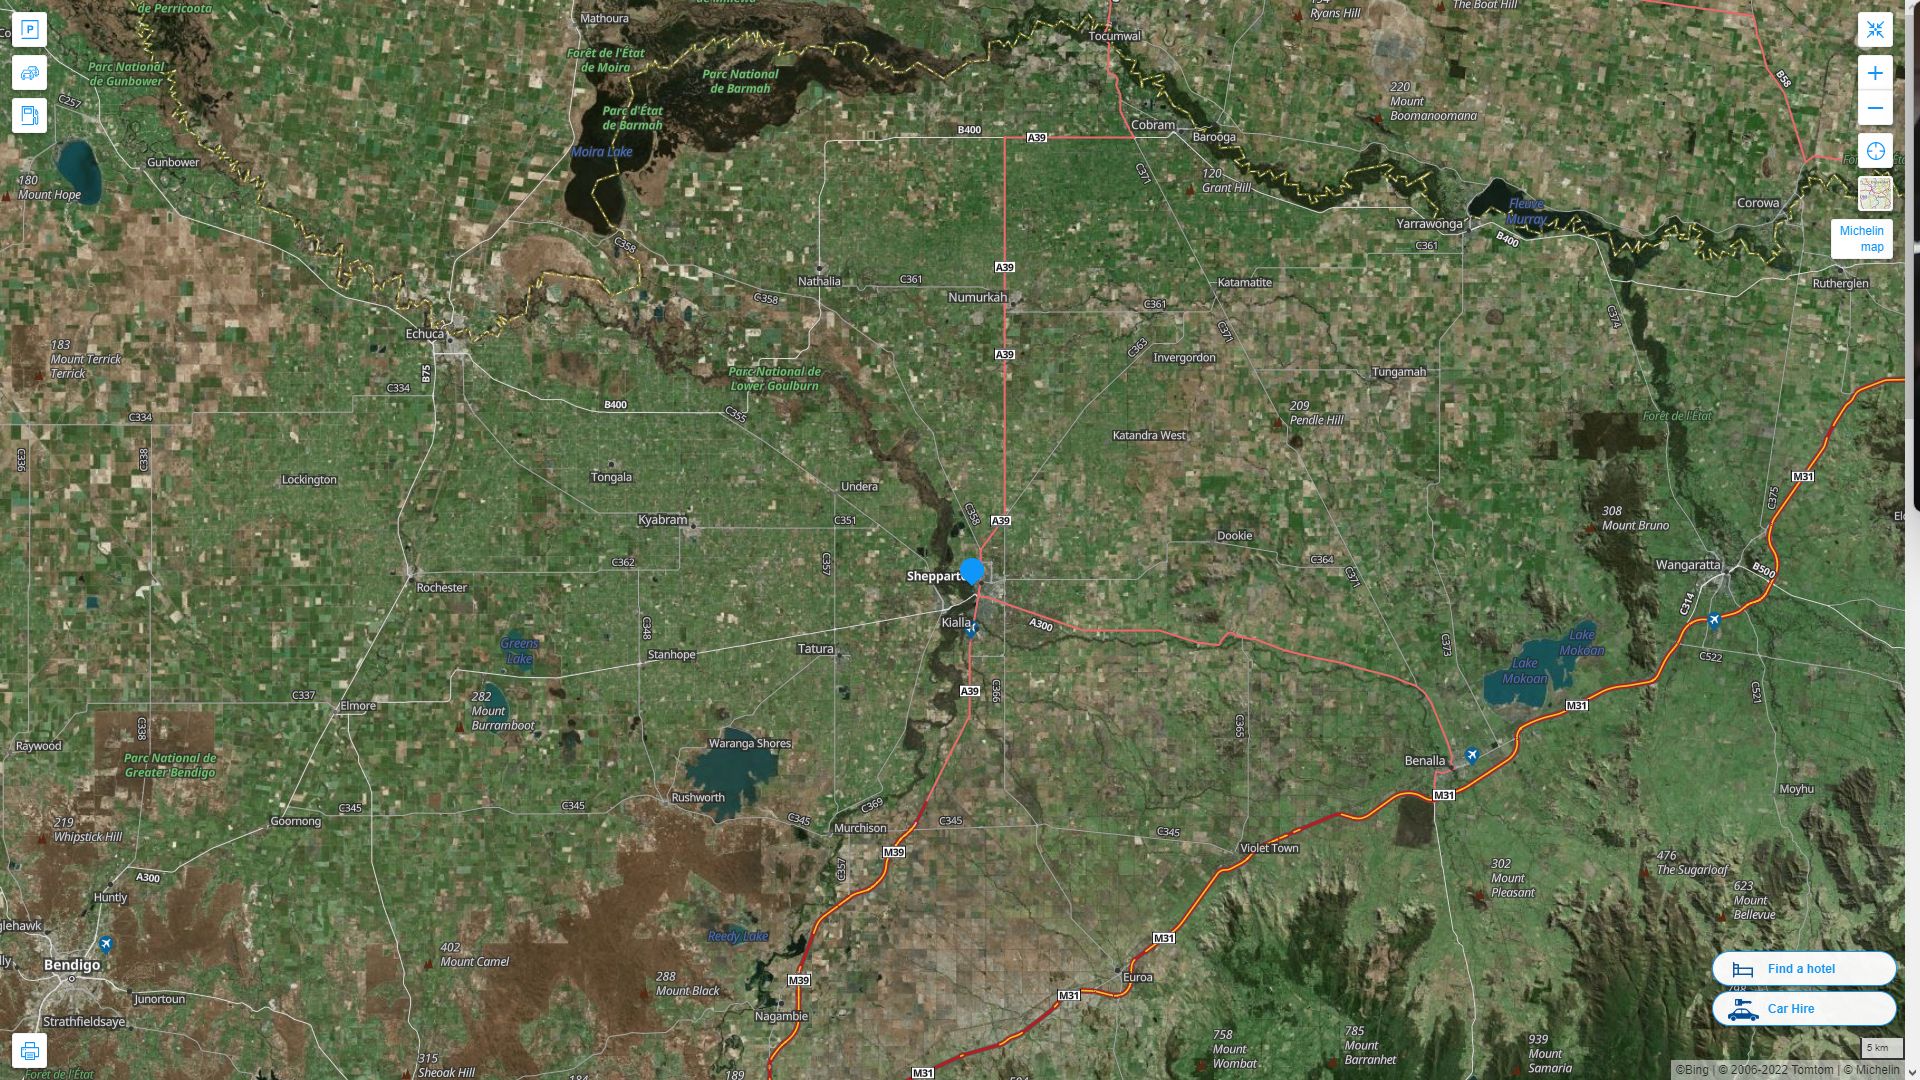 Shepparton Highway and Road Map with Satellite View